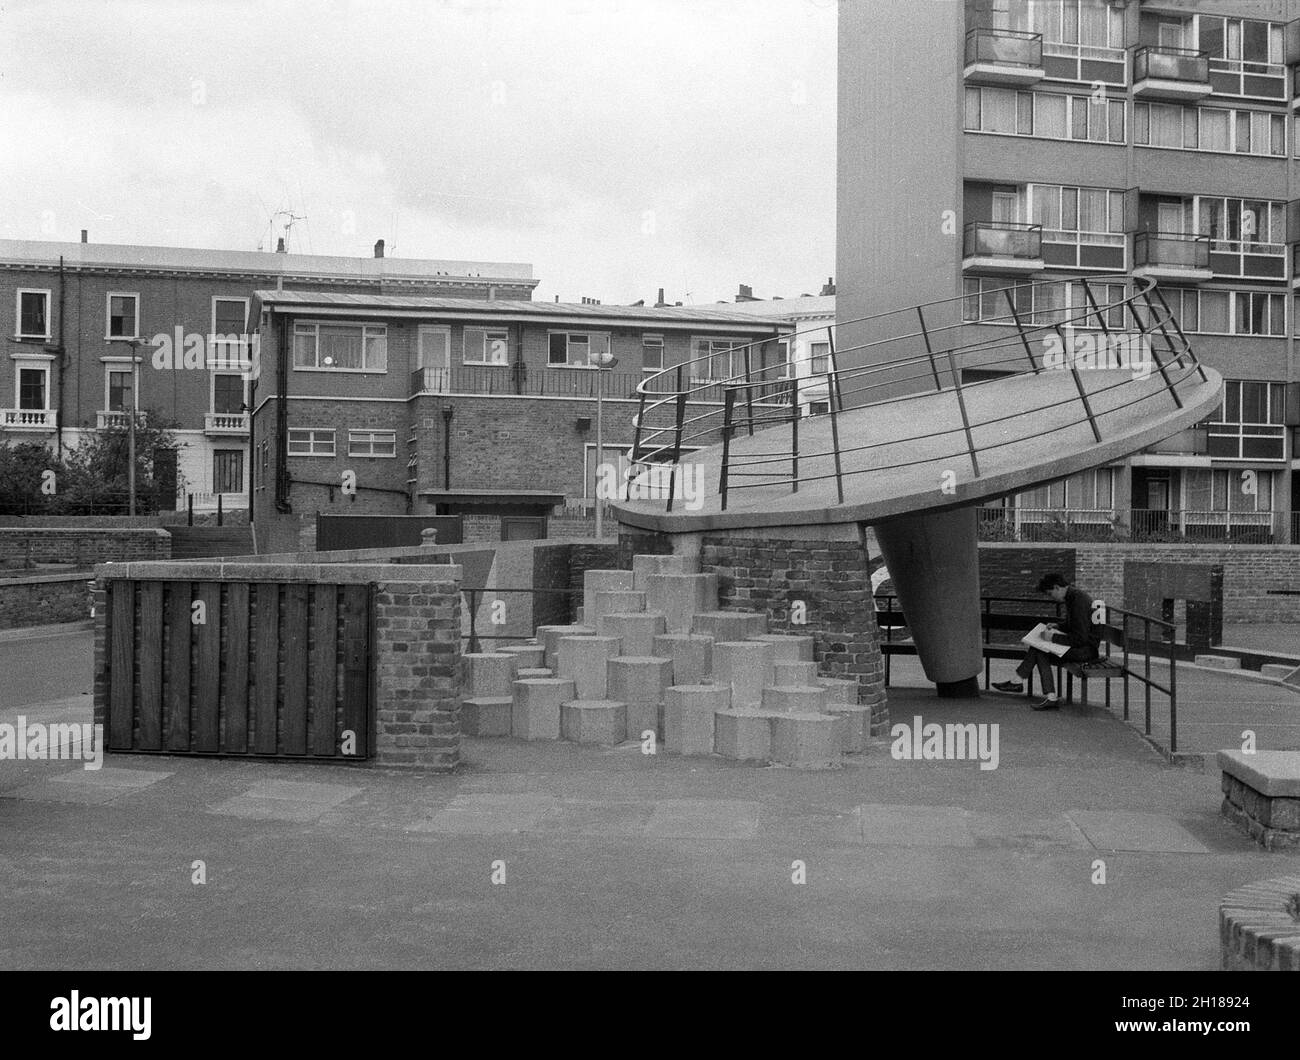 1960s, historical, a concrete made playground area outside a large council housing estate, Churchill Gardens in Pimlico, inner London, England, UK. Built between 1948 and 1962 to replace victorian terraces damaged in the Blitz of WW2, this was a huge estate of social housing, with 32 tower blocks providing 1,600 homes. Seen in the picture a young man sitting on a bench underneath a concrete made playground saucer with railings, with hexagon steps up. Stock Photo